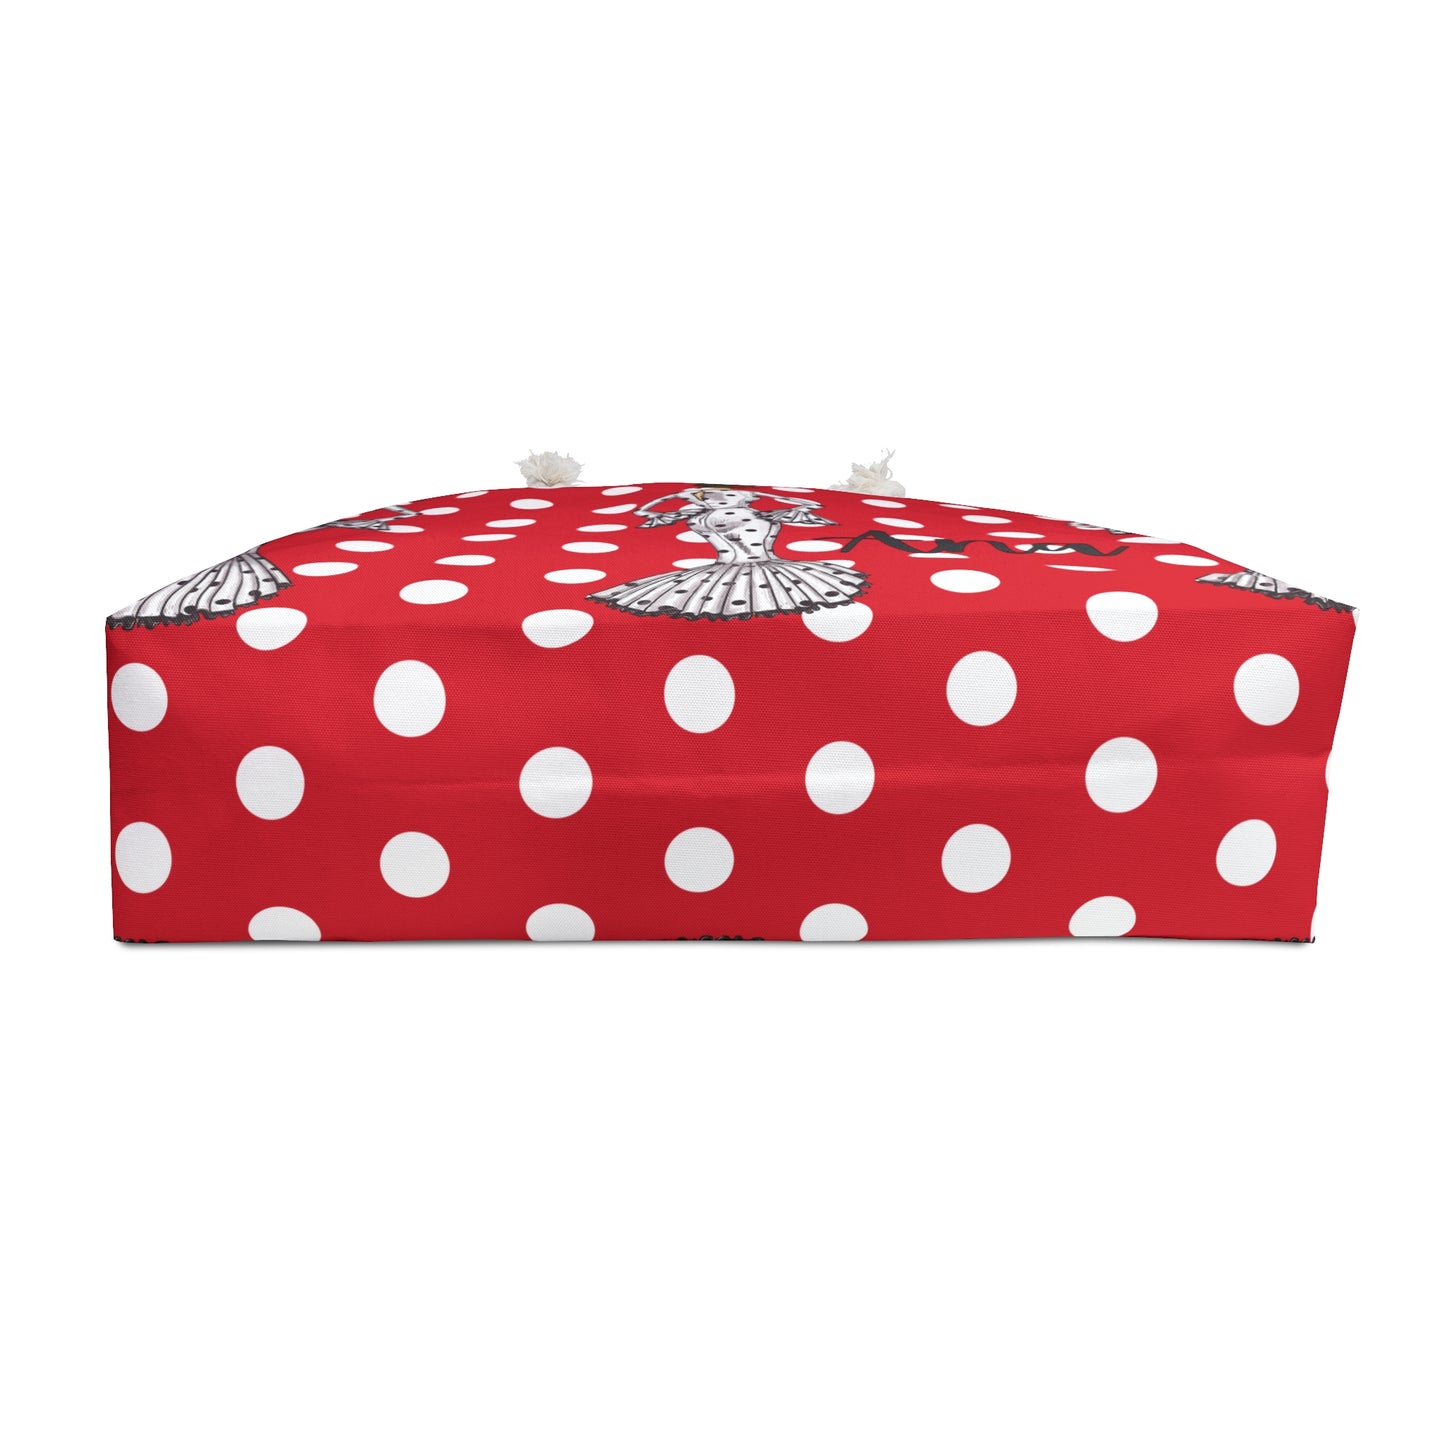 a red and white polka dot covered box